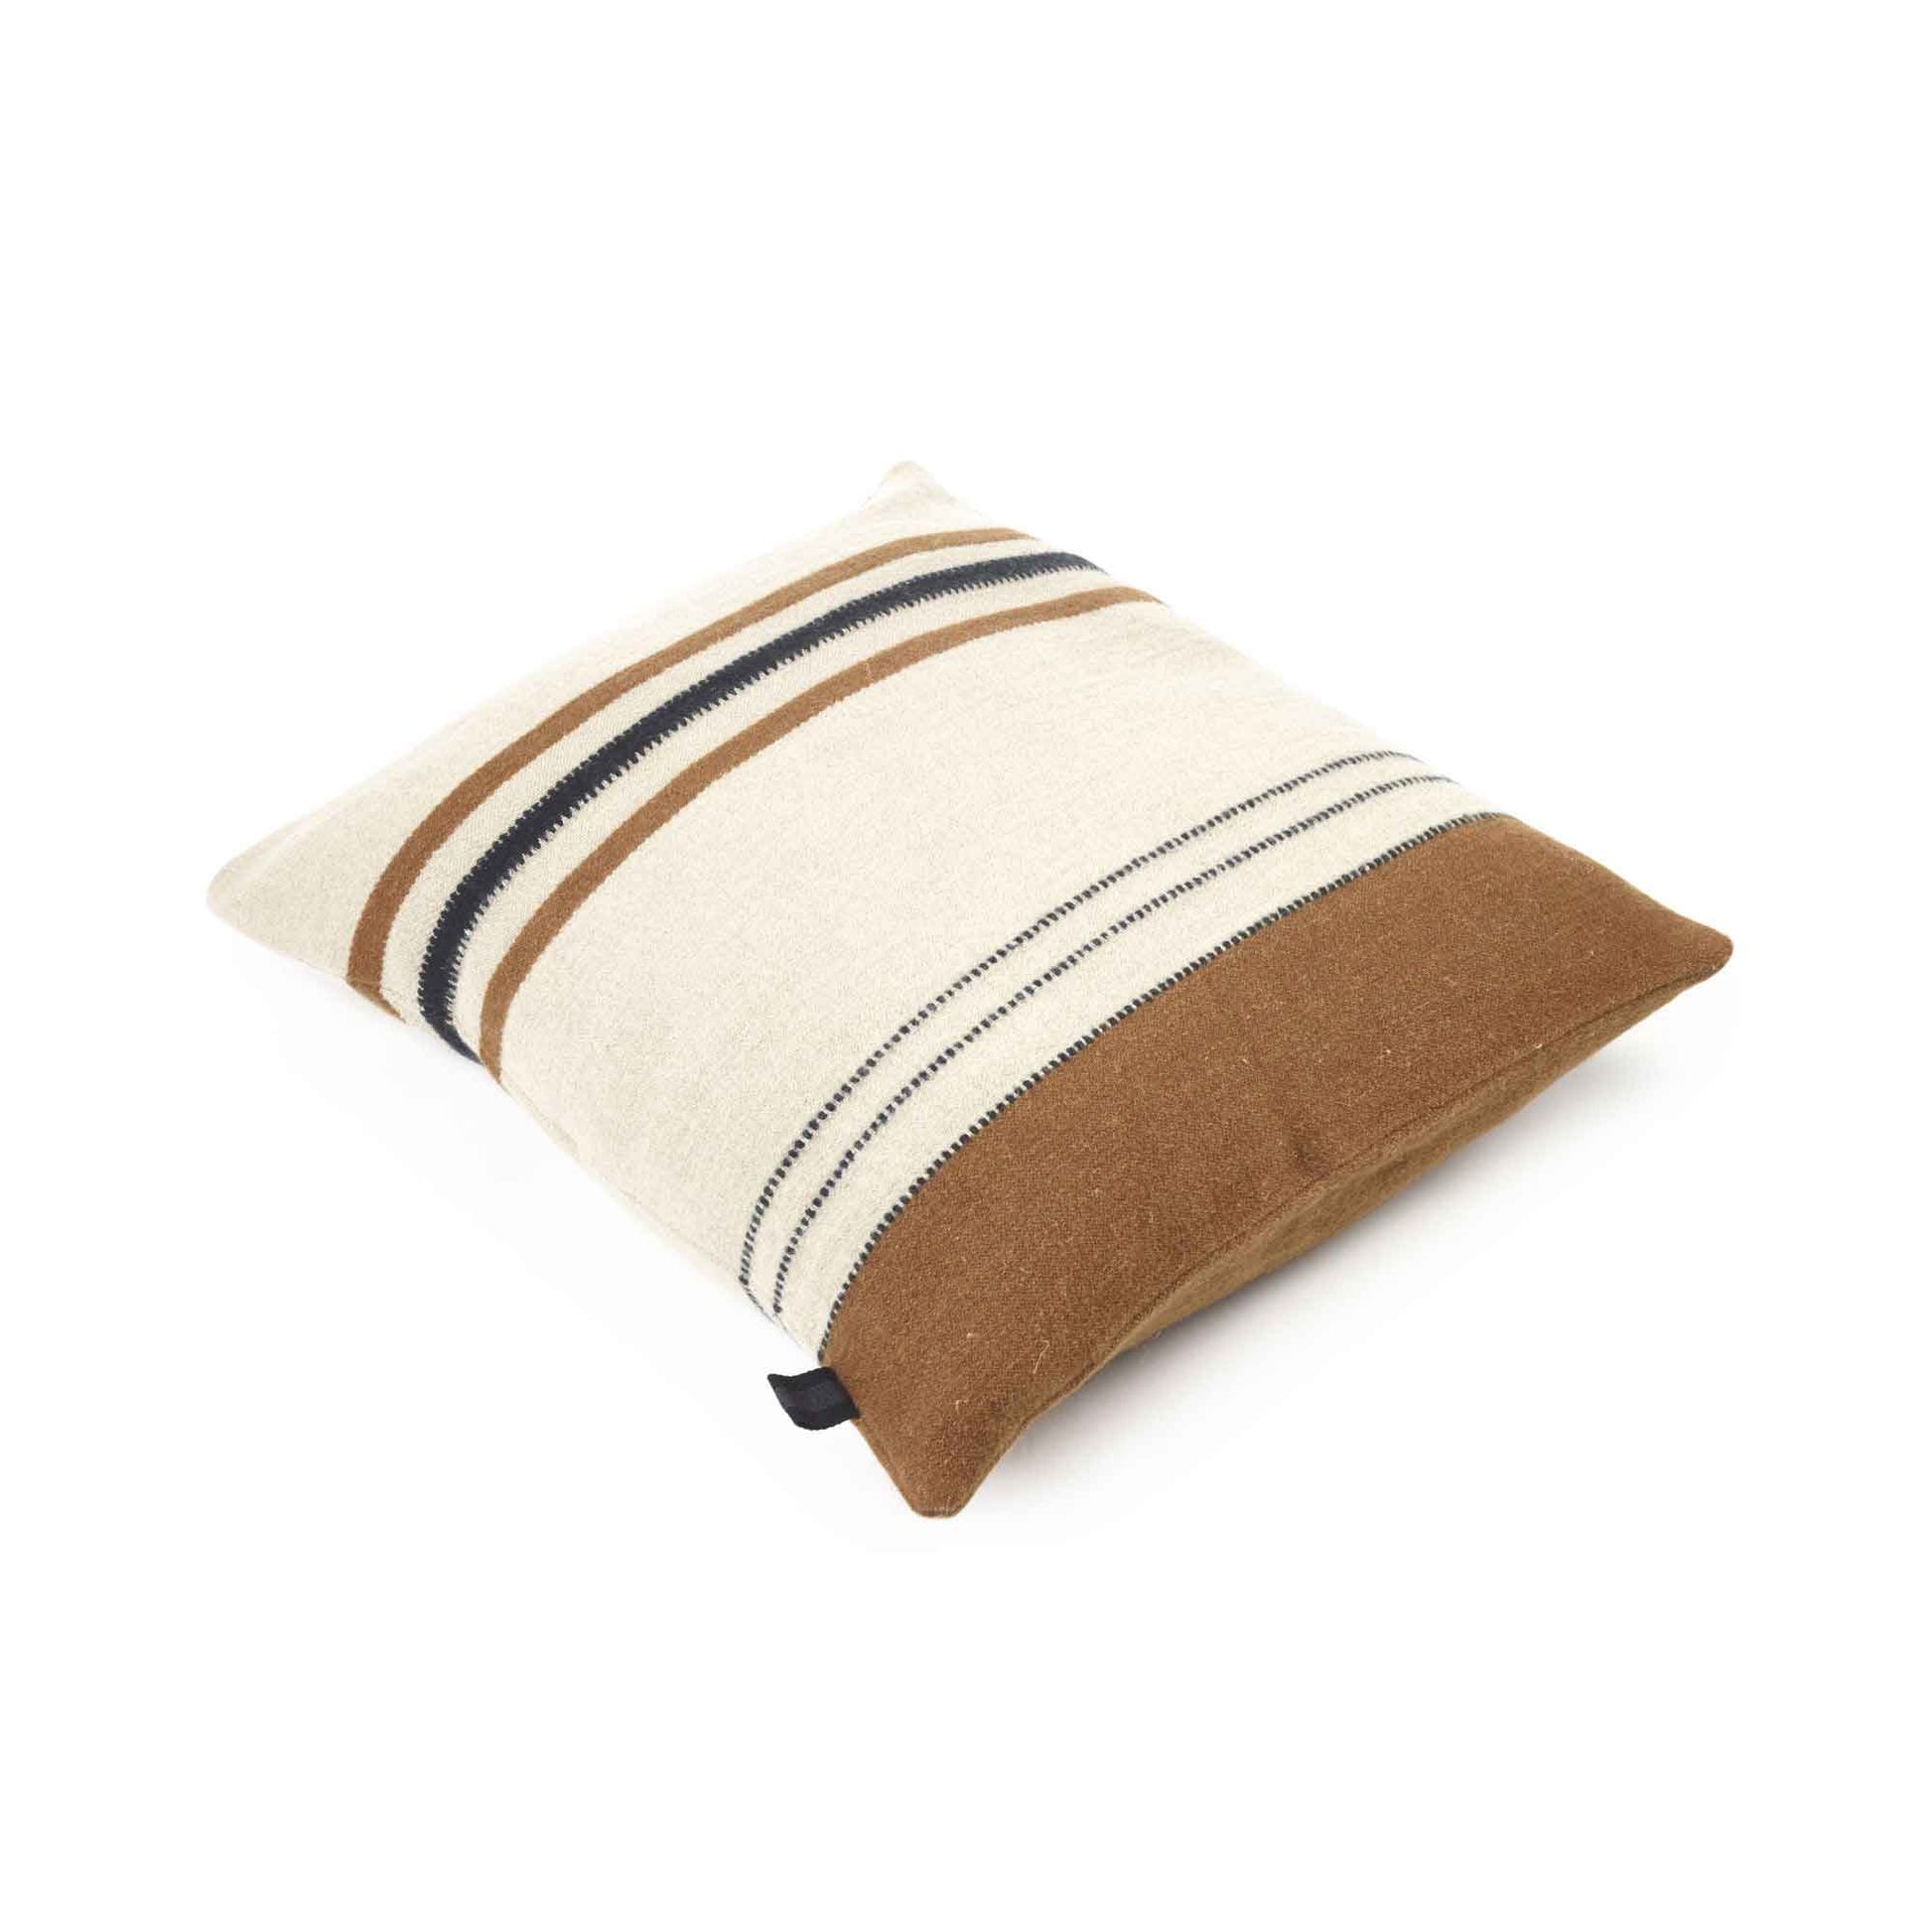 Linen and wool blend throw pillow cover angled flat lay product shot in color Foundry by Libeco for South Hous.